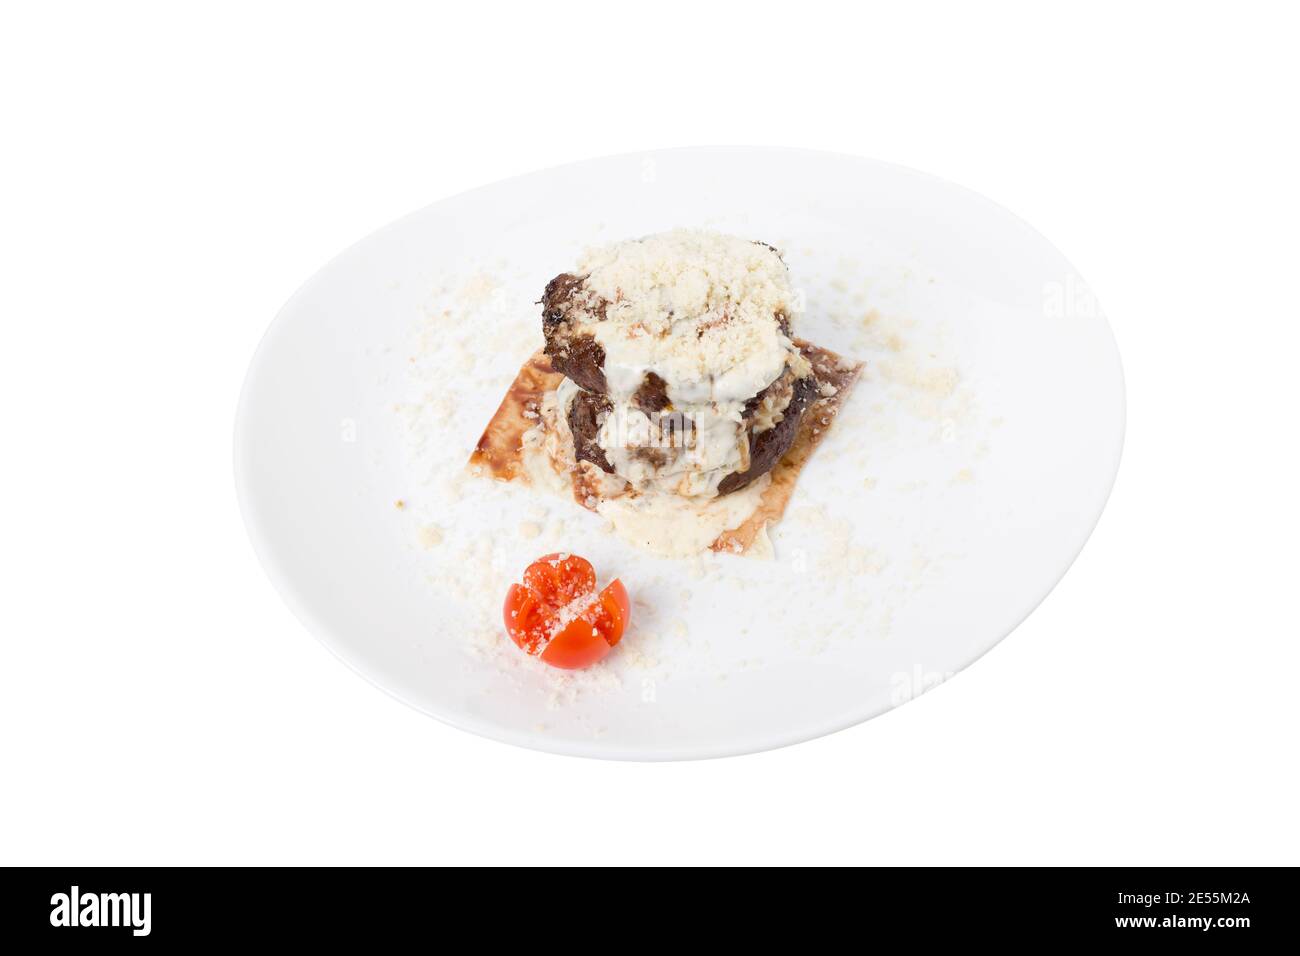 Meat medallion in white sauce on pita bread. This is isolated in a white background. Close-up. Stock Photo